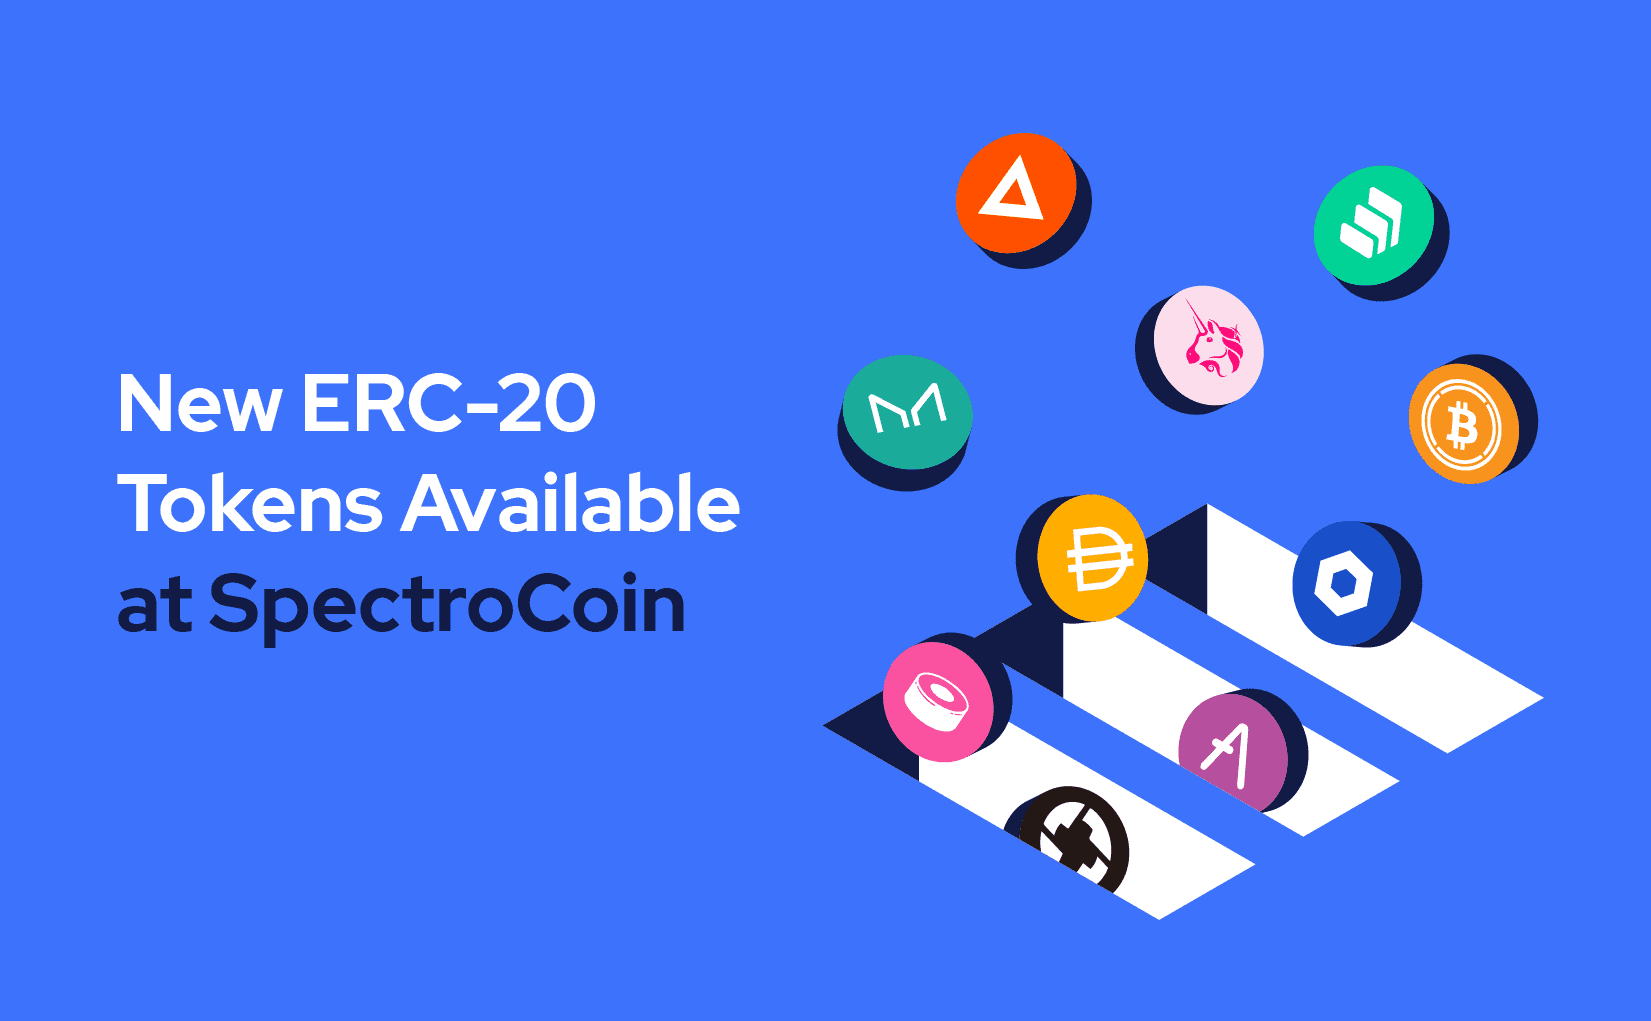 New ERC-20 tokens live at SpectroCoin